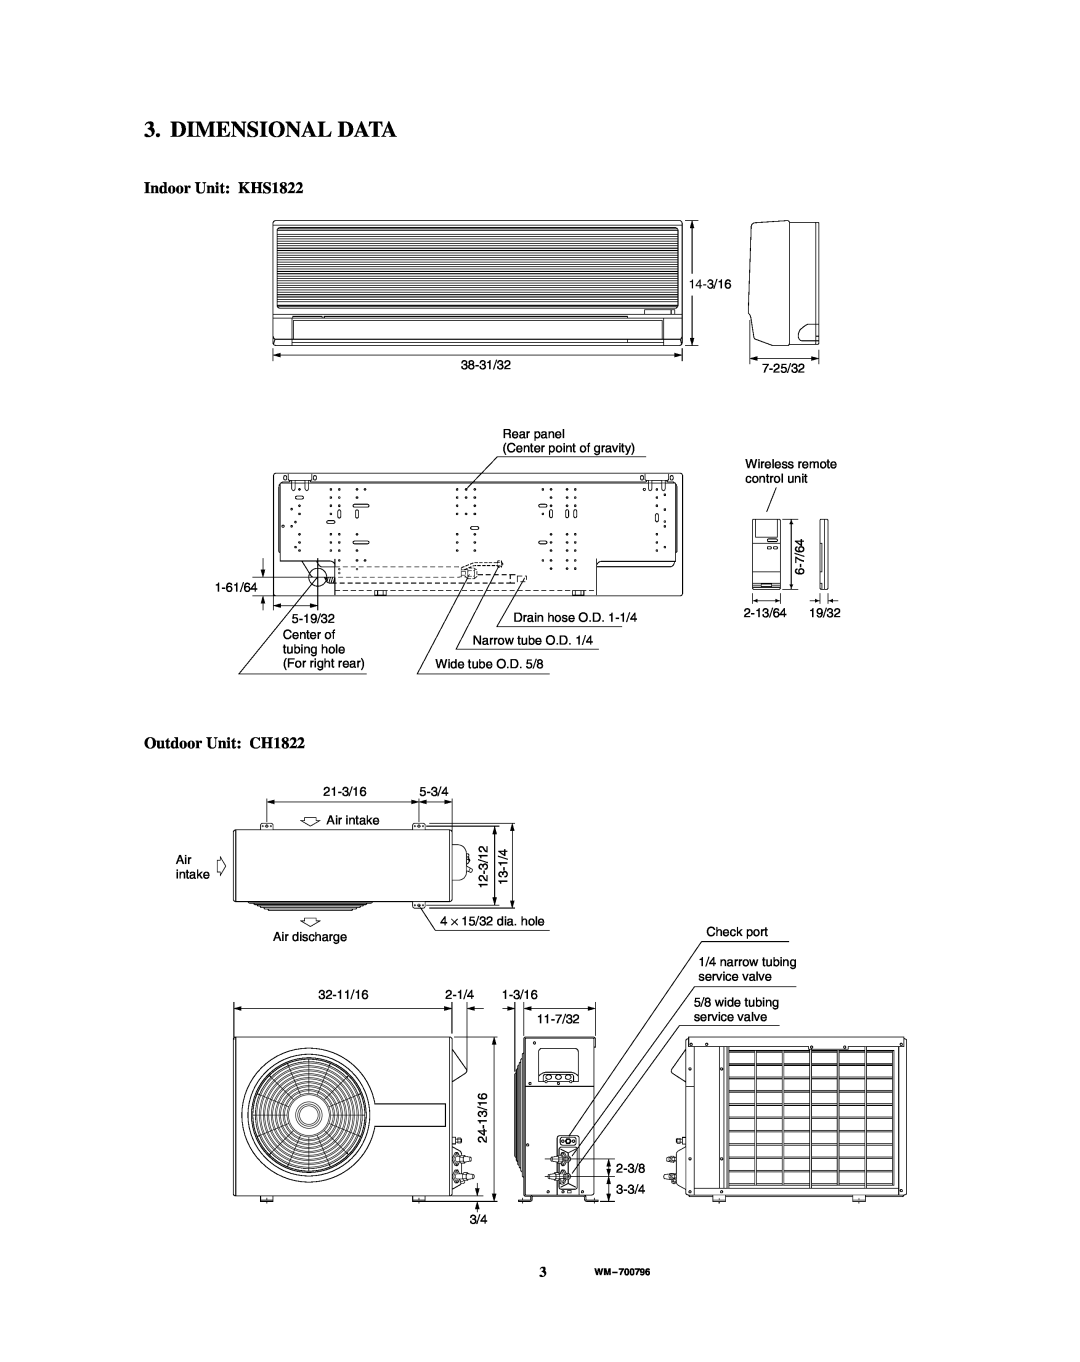 Sanyo service manual Dimensional Data, Indoor Unit KHS1822, Outdoor Unit: CH1822 